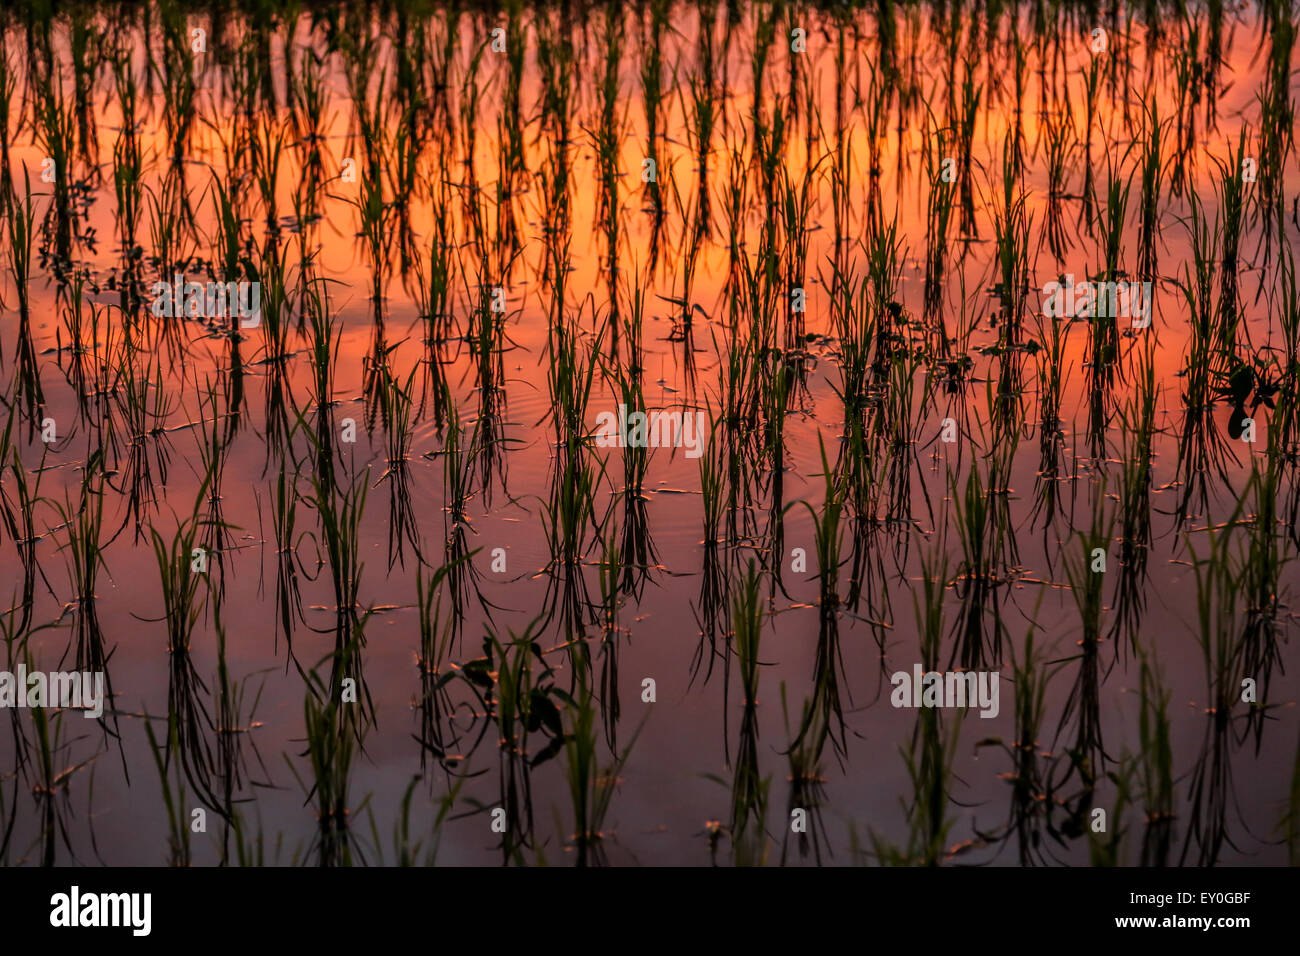 Rice paddy lit from sunset showing red, orange, yellow reflection. horizontal texture and background image Stock Photo